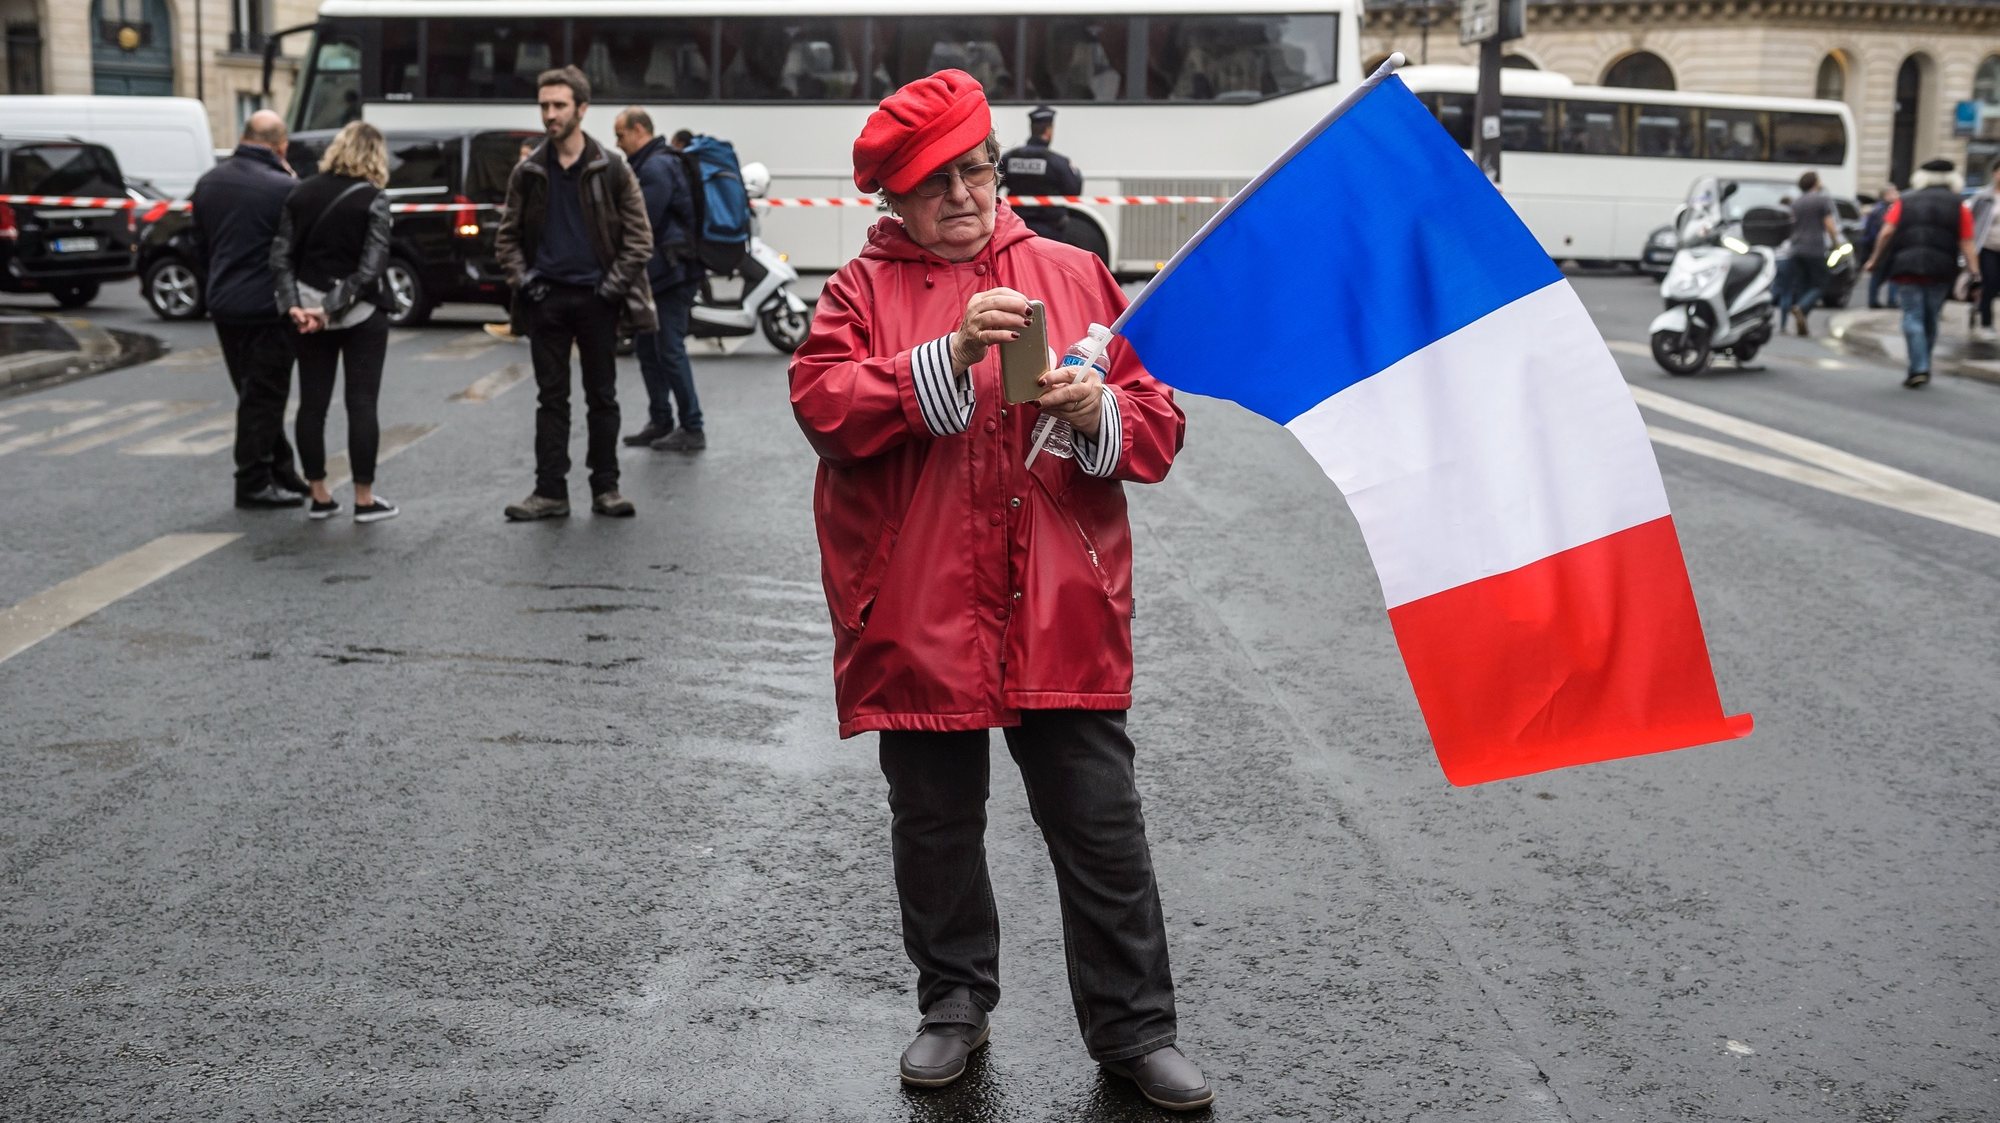 epa06232312 A protester holds a french flag during a demonstration led by french unions for retired against the decrease of the purchasing power in Paris, France, 28 September 2017. This demonstration takes part of a series of national protests against the president Emmanuel Macron new policies.  EPA/CHRISTOPHE PETIT TESSON